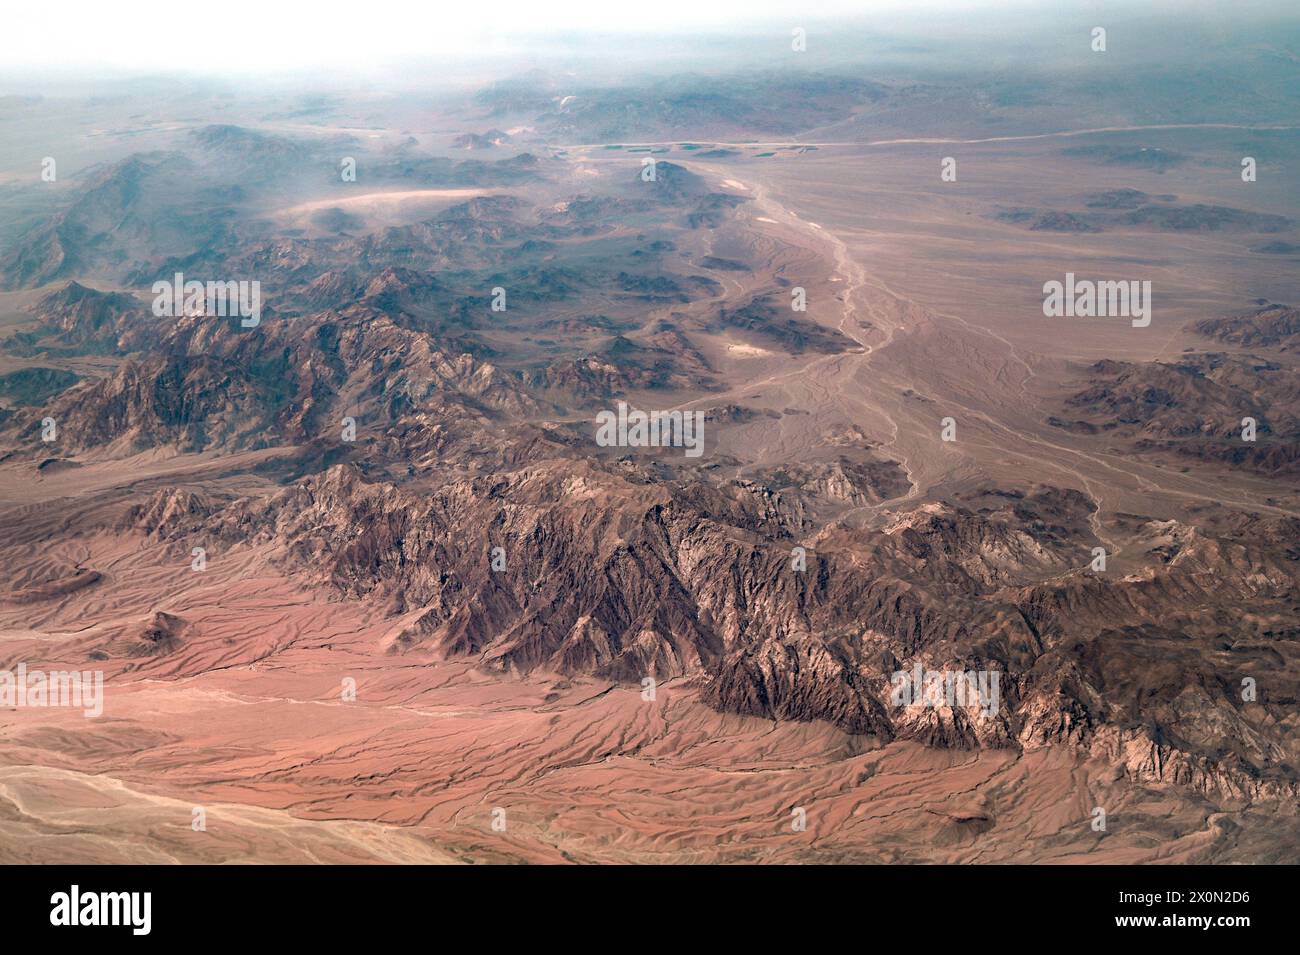 Amazing landscape of Iran or Persia with sandy valleys, hills, mountains Stock Photo